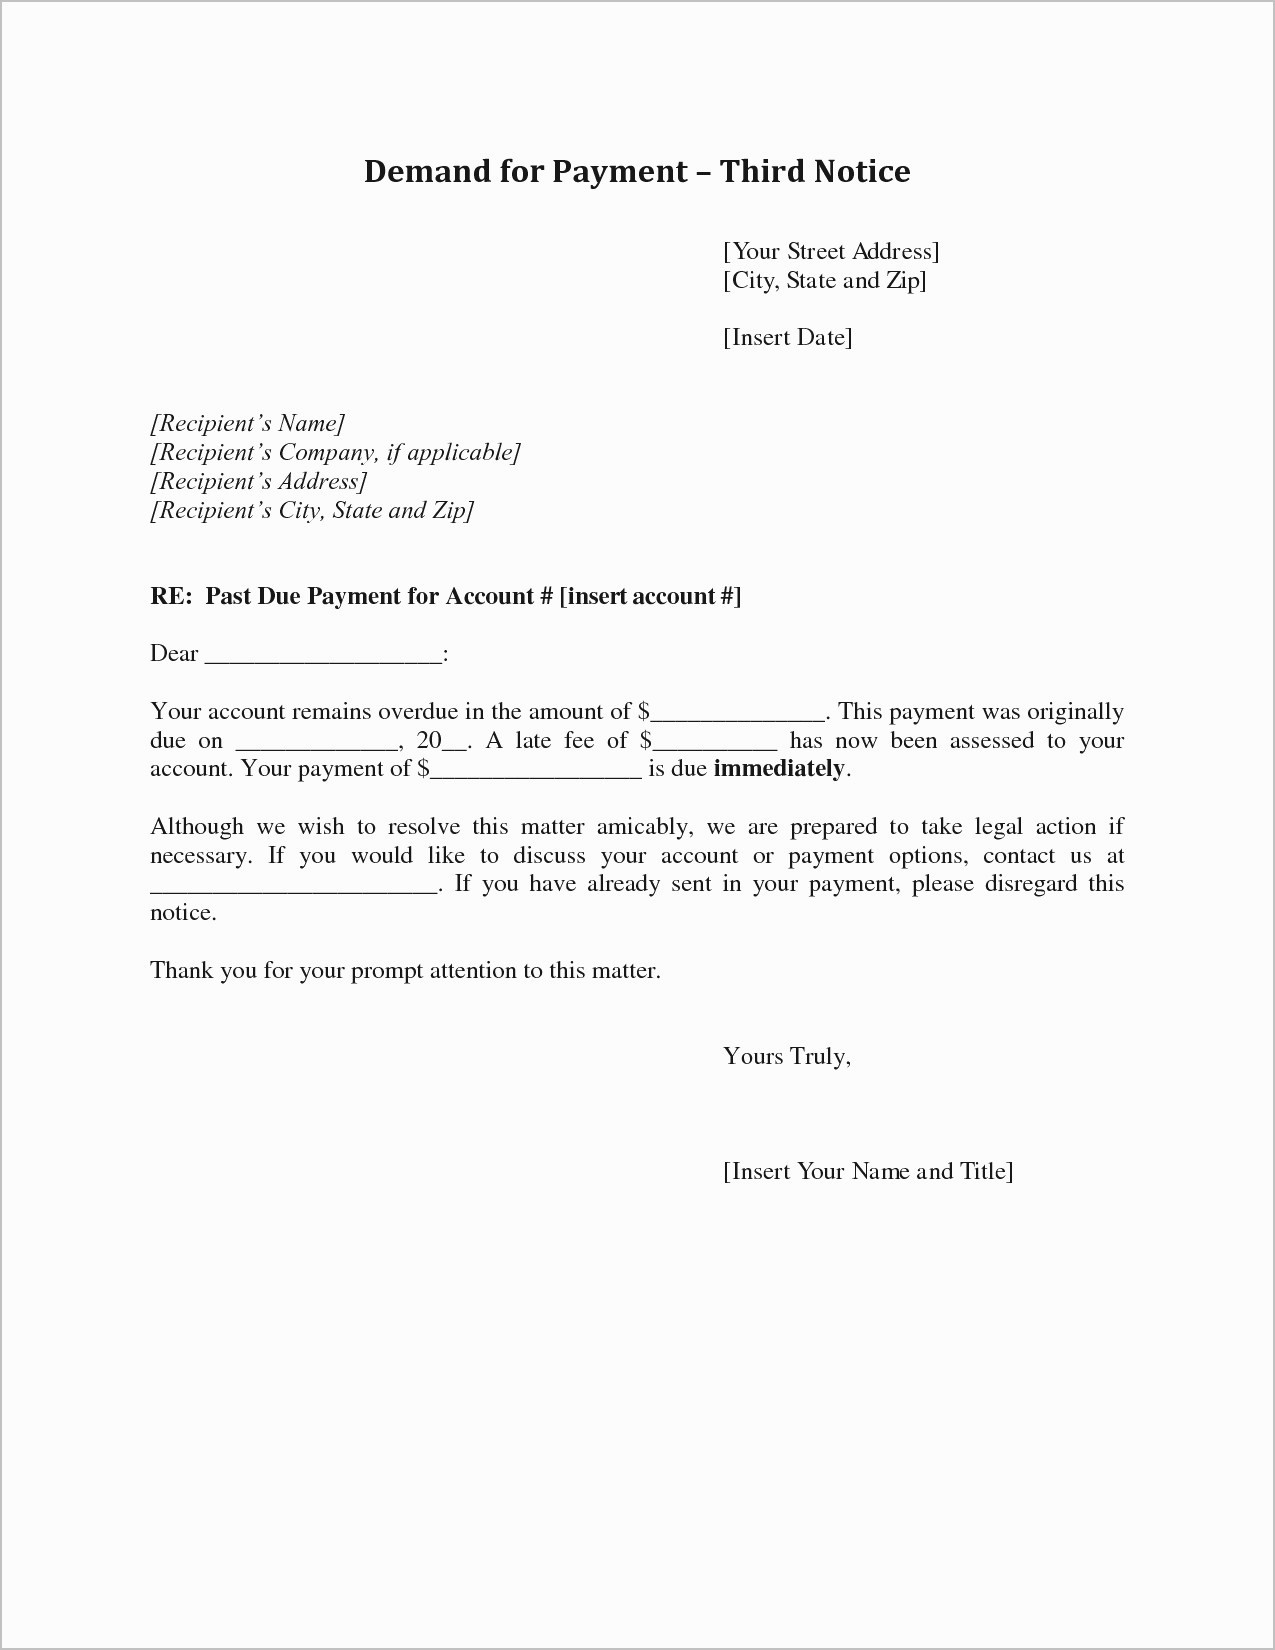 renters insurance letter template Collection-Homeowners Insurance Non Renewal Letter Unique Sample Demand Letter for Unpaid Rent Beautiful Letter Od Demand 9-i